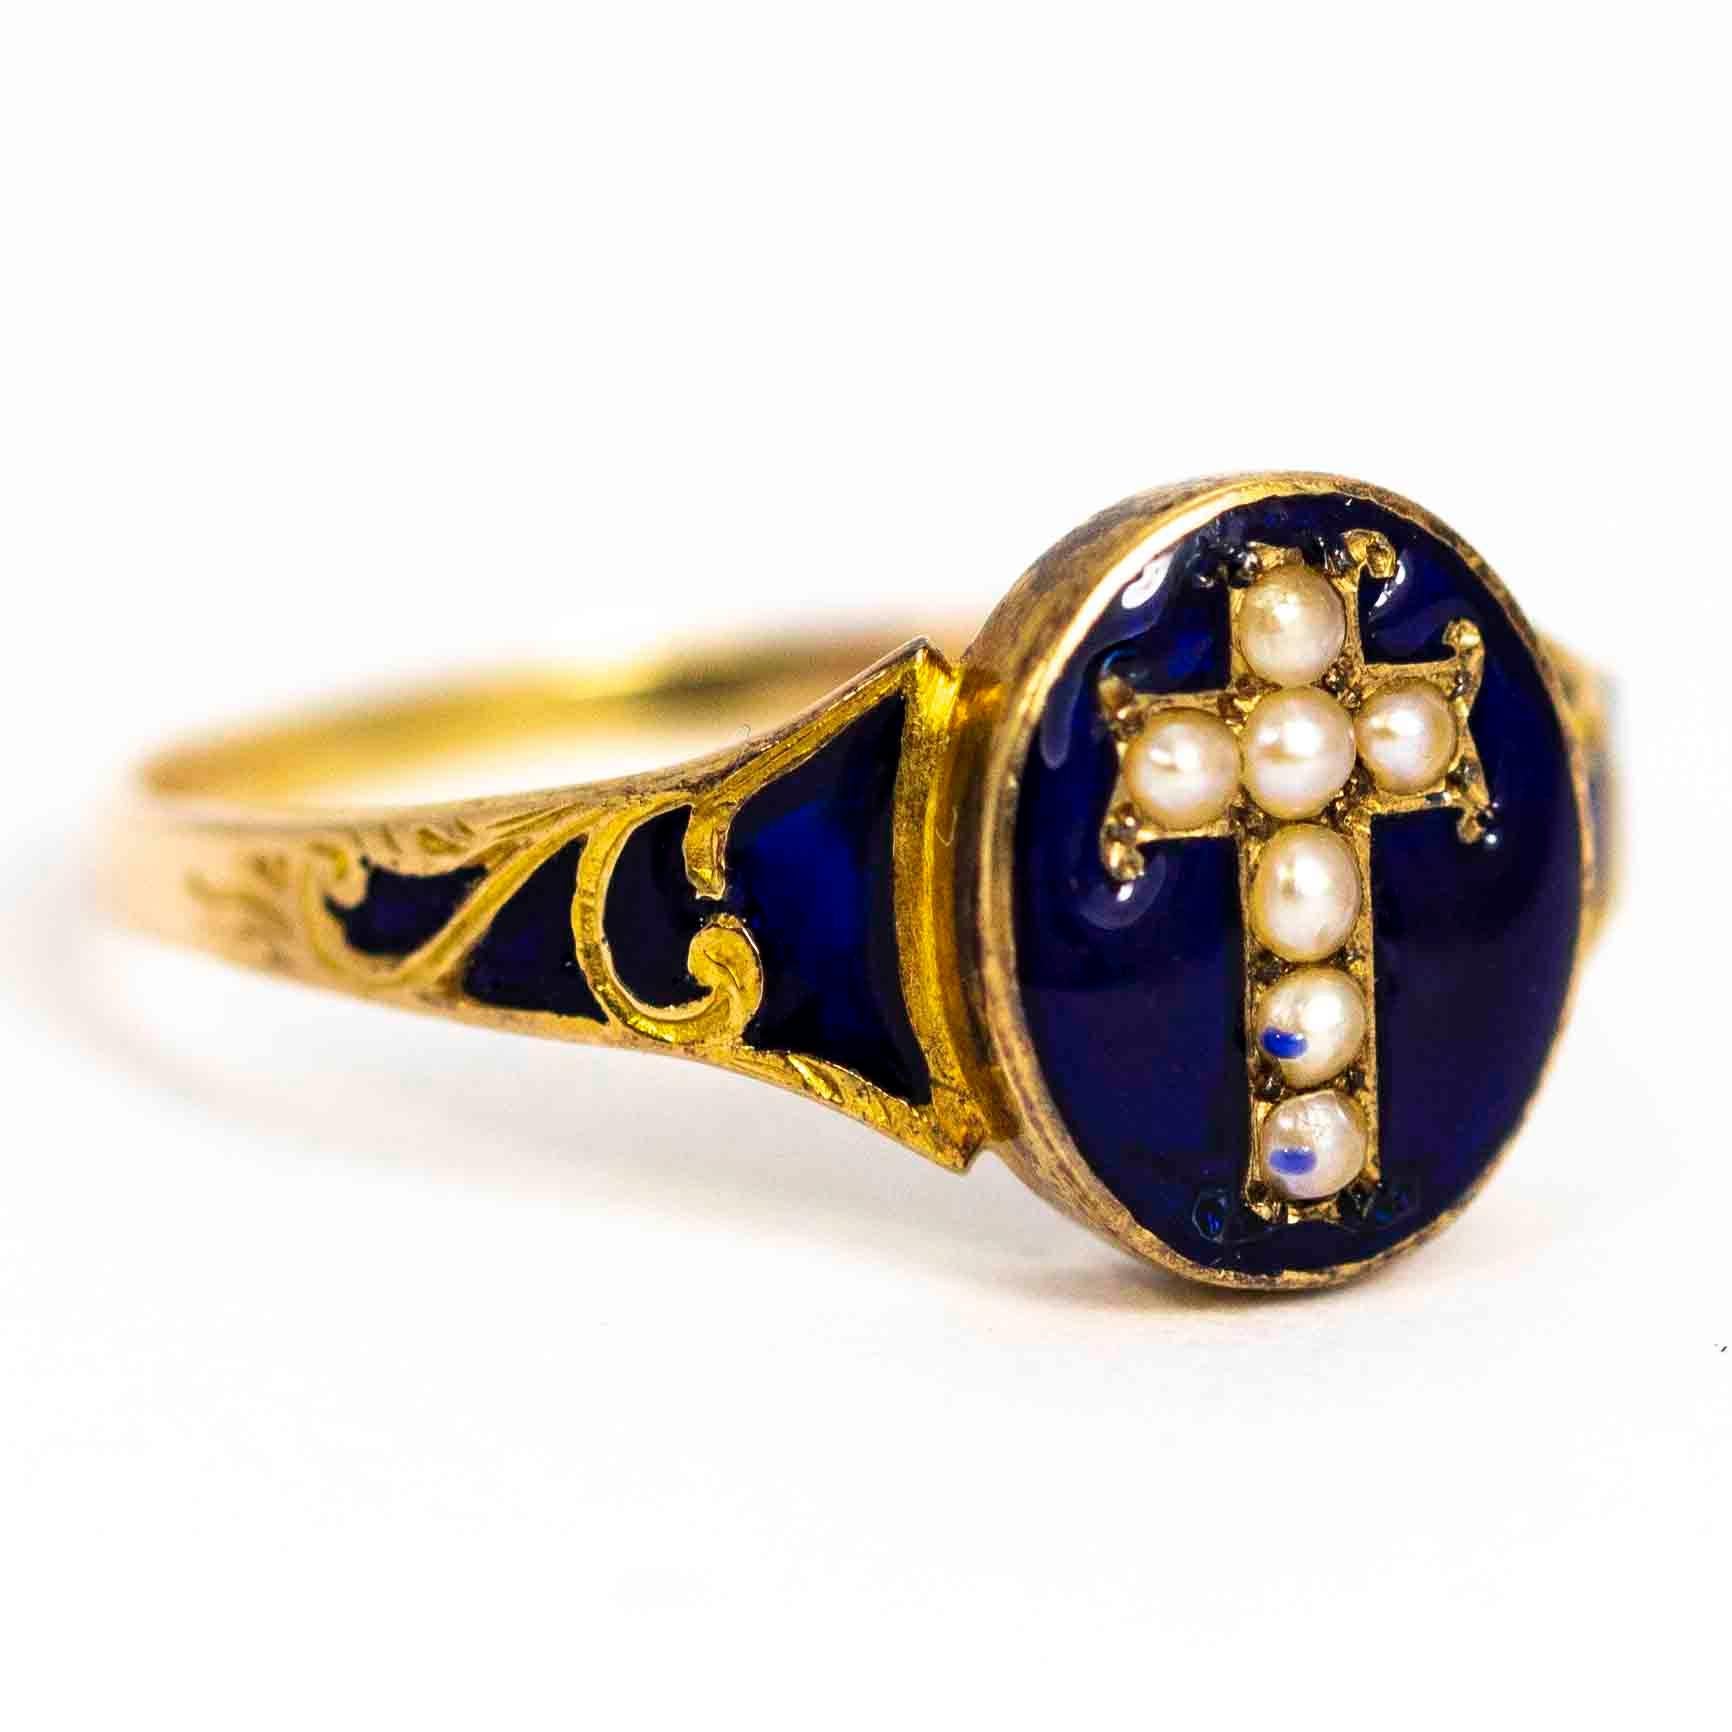 Women's or Men's Victorian 18 Carat Gold Royal Blue Enamel and Pearl Cross Mourning Ring